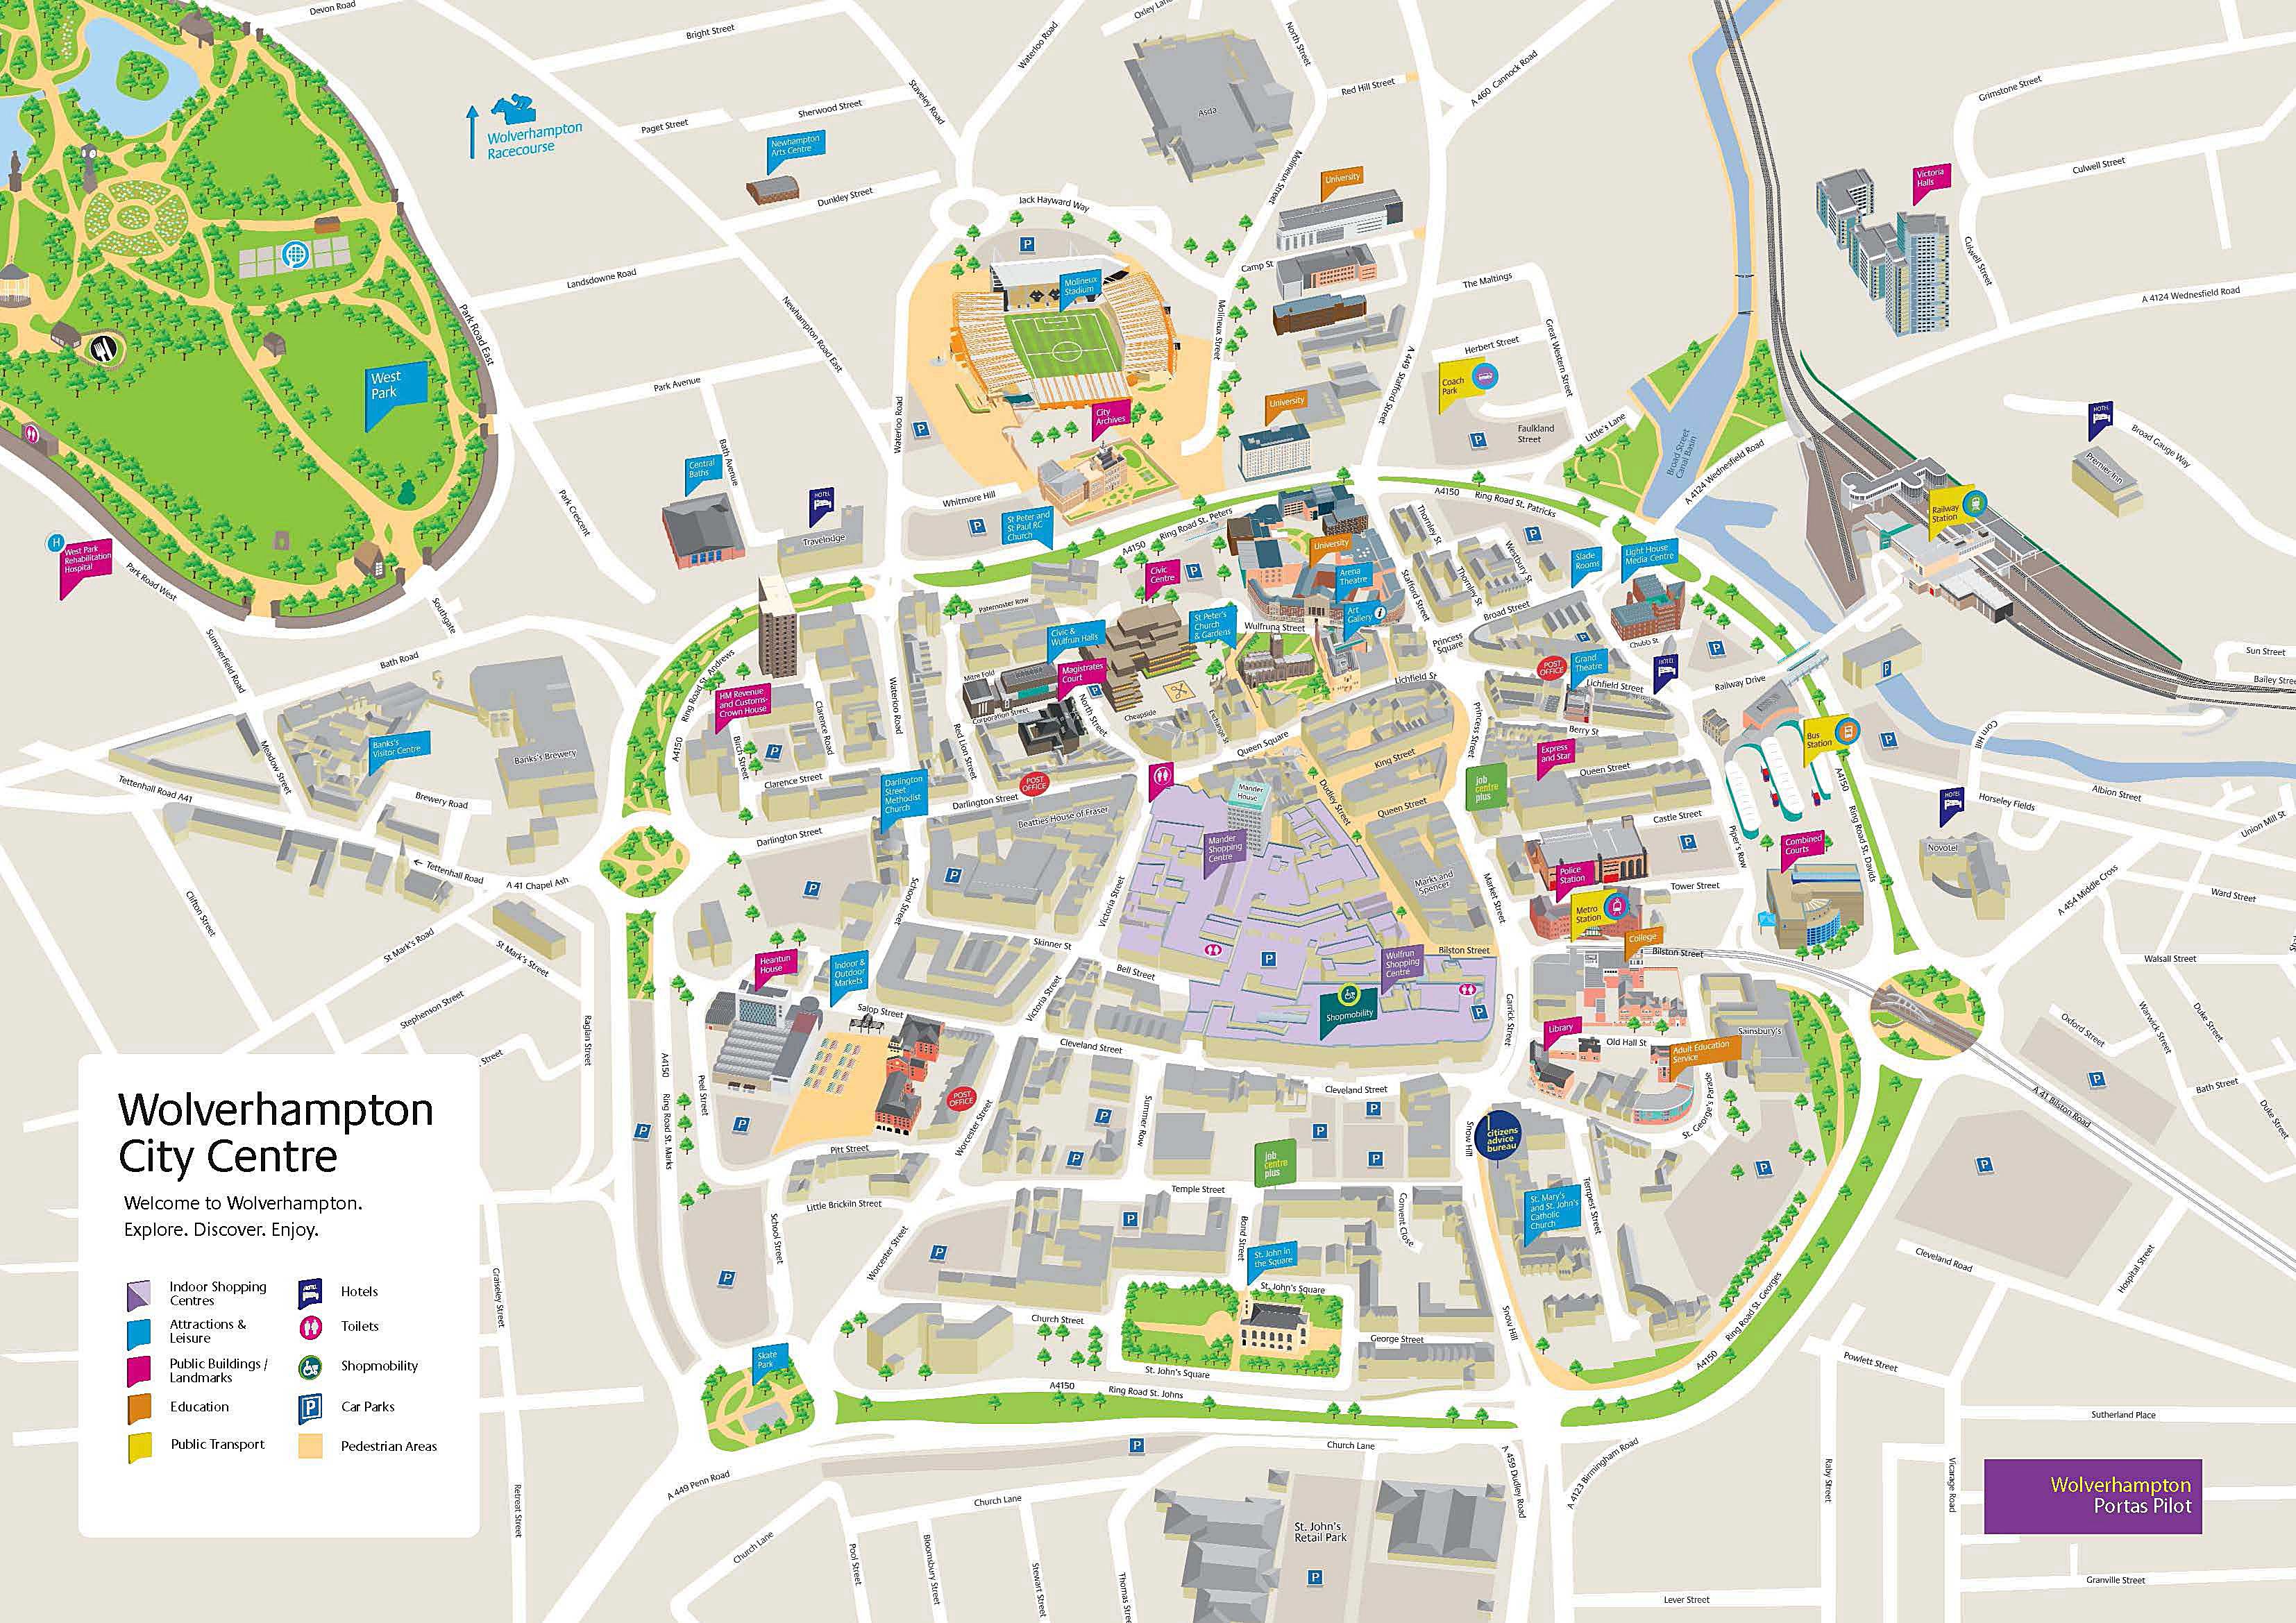 Large Wolverhampton Maps for Free Download and Print | High-Resolution and Detailed Maps3308 x 2339